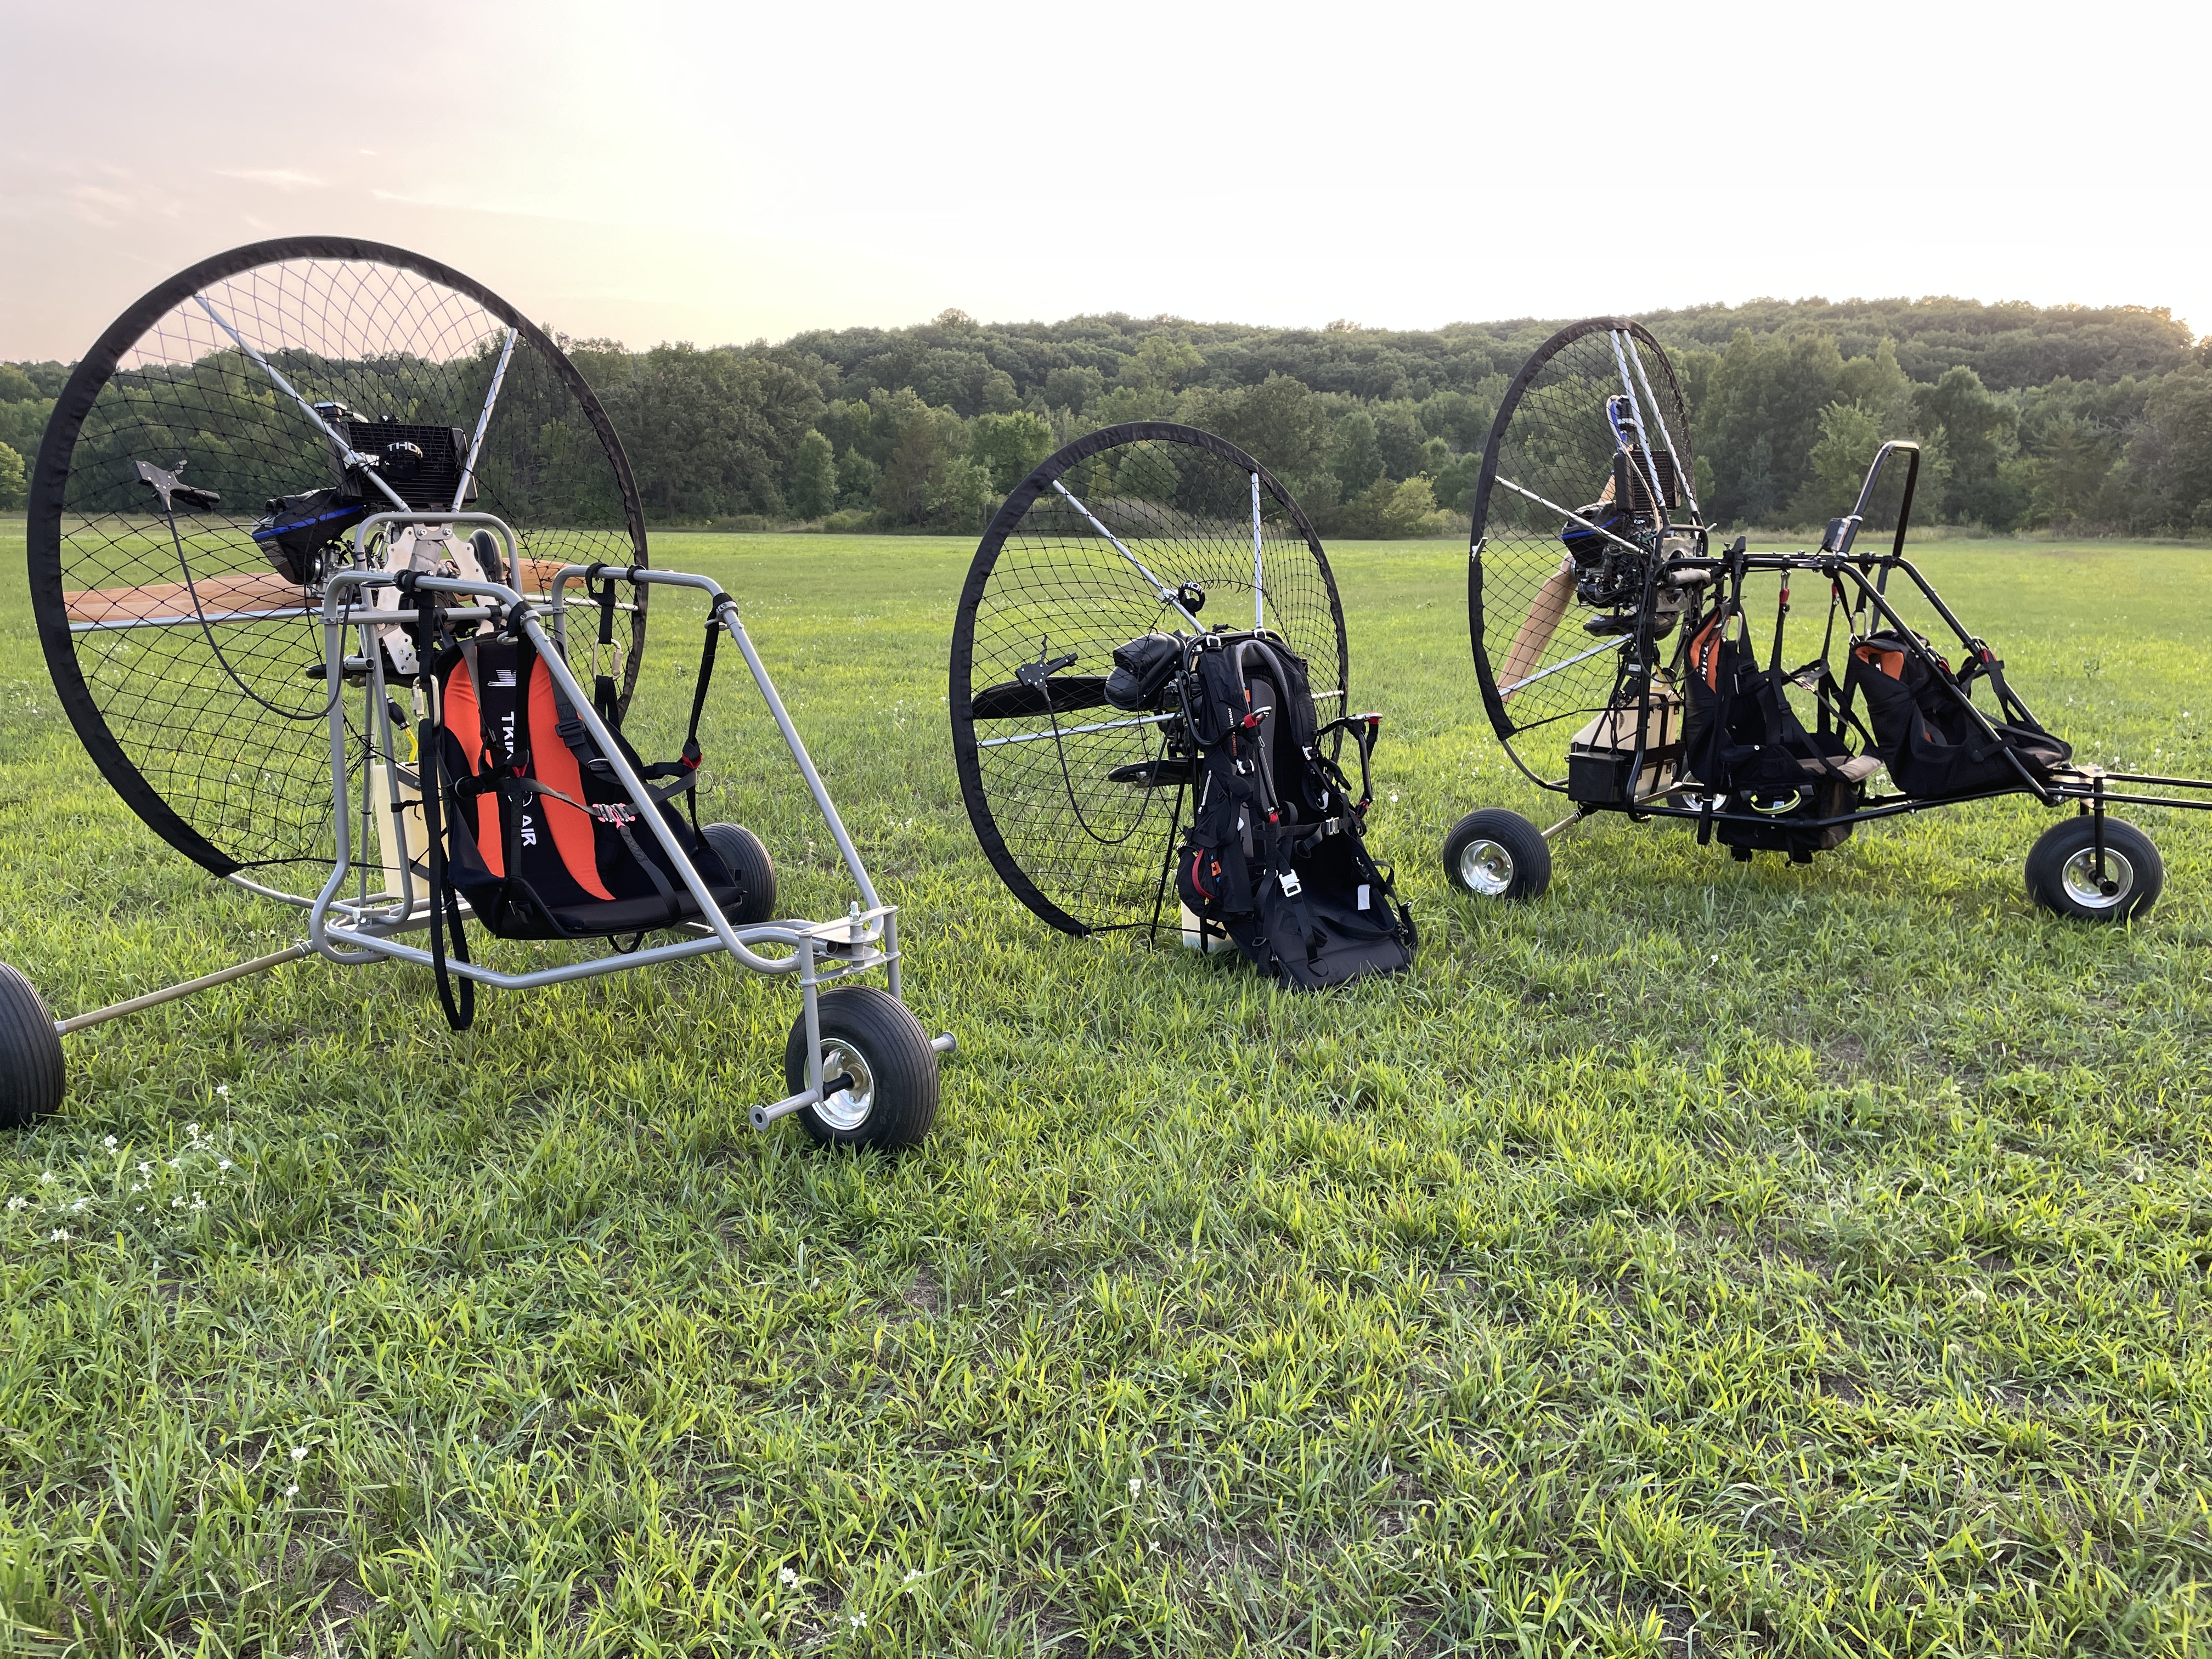 Paramotor Central, Powered Paragliding